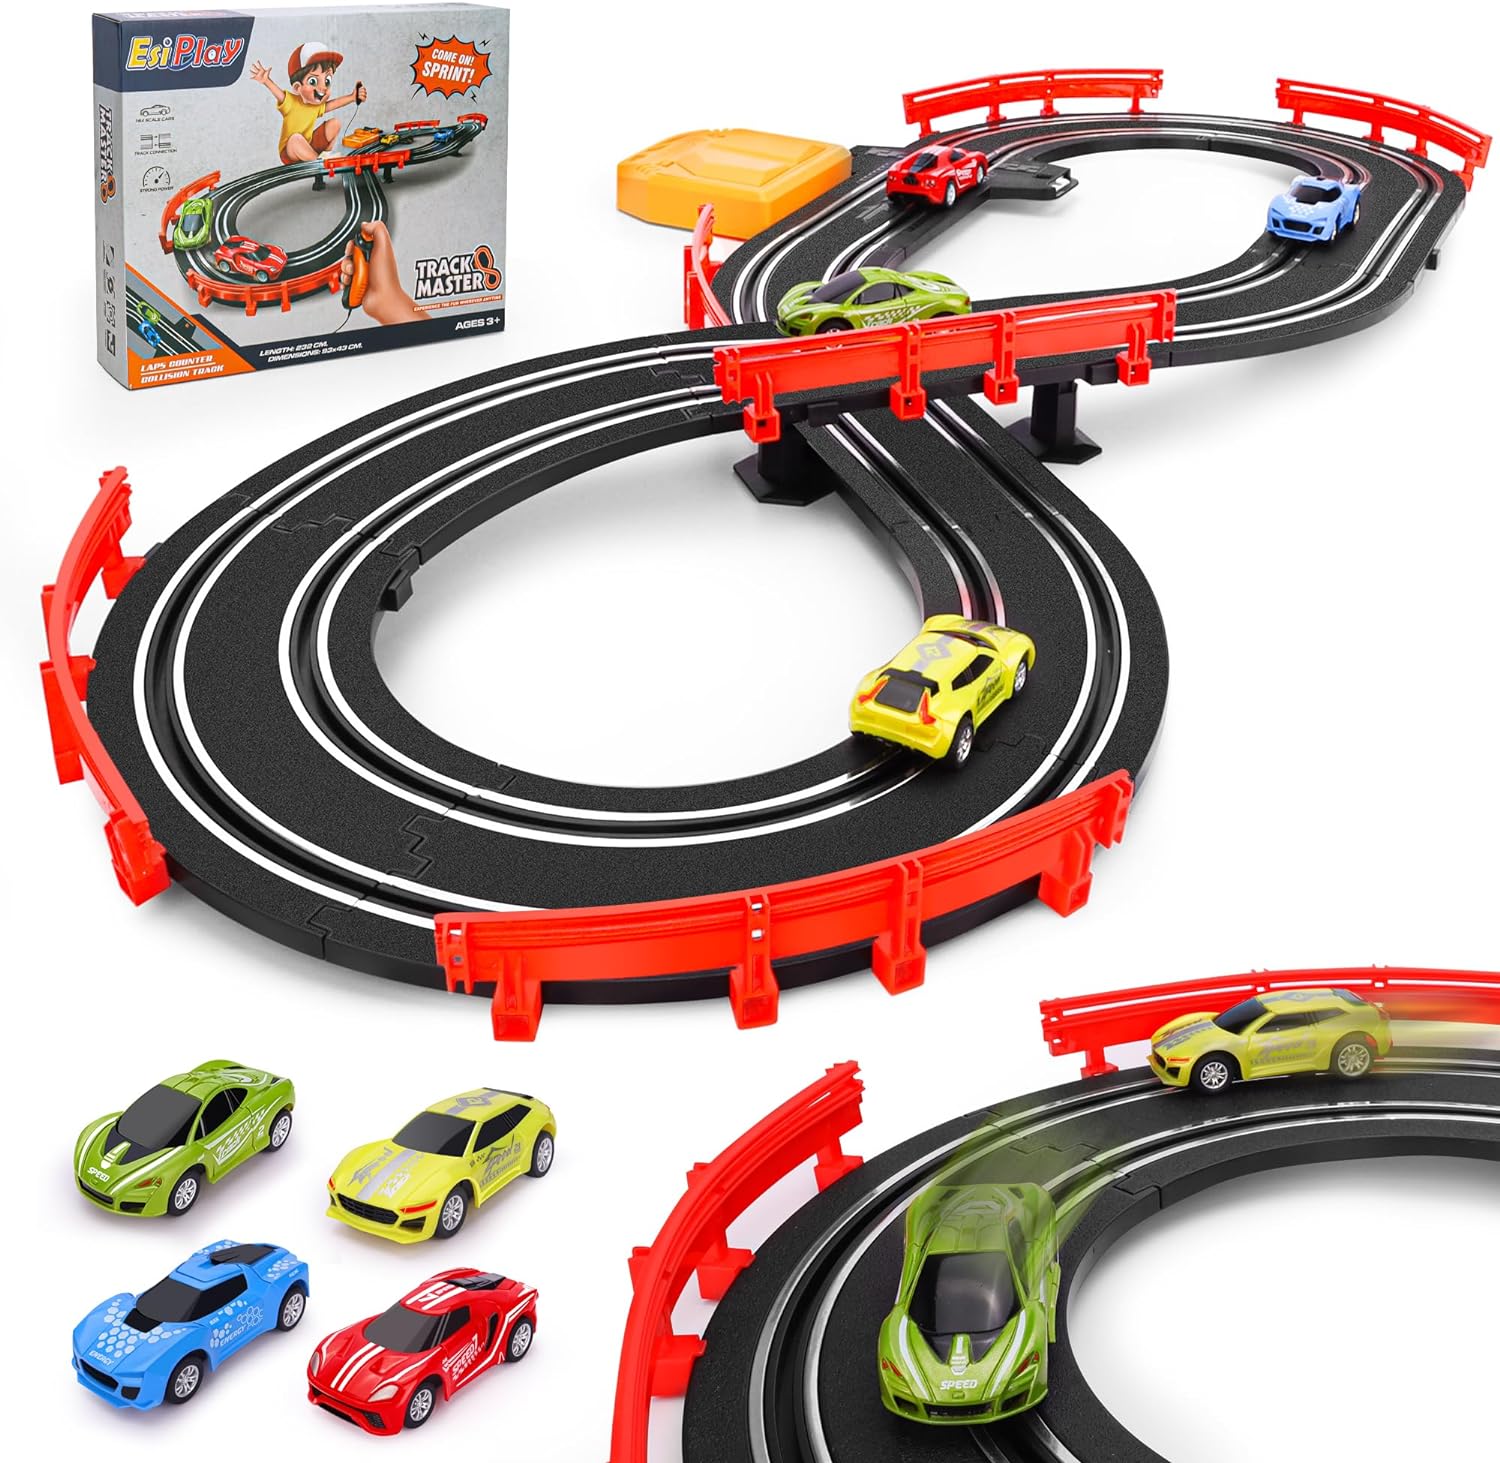 Slot Car Race Track Sets, Electric Kids Race Car Track with 4 Slot Cars, High Speed Race Car Toy - Cykapu